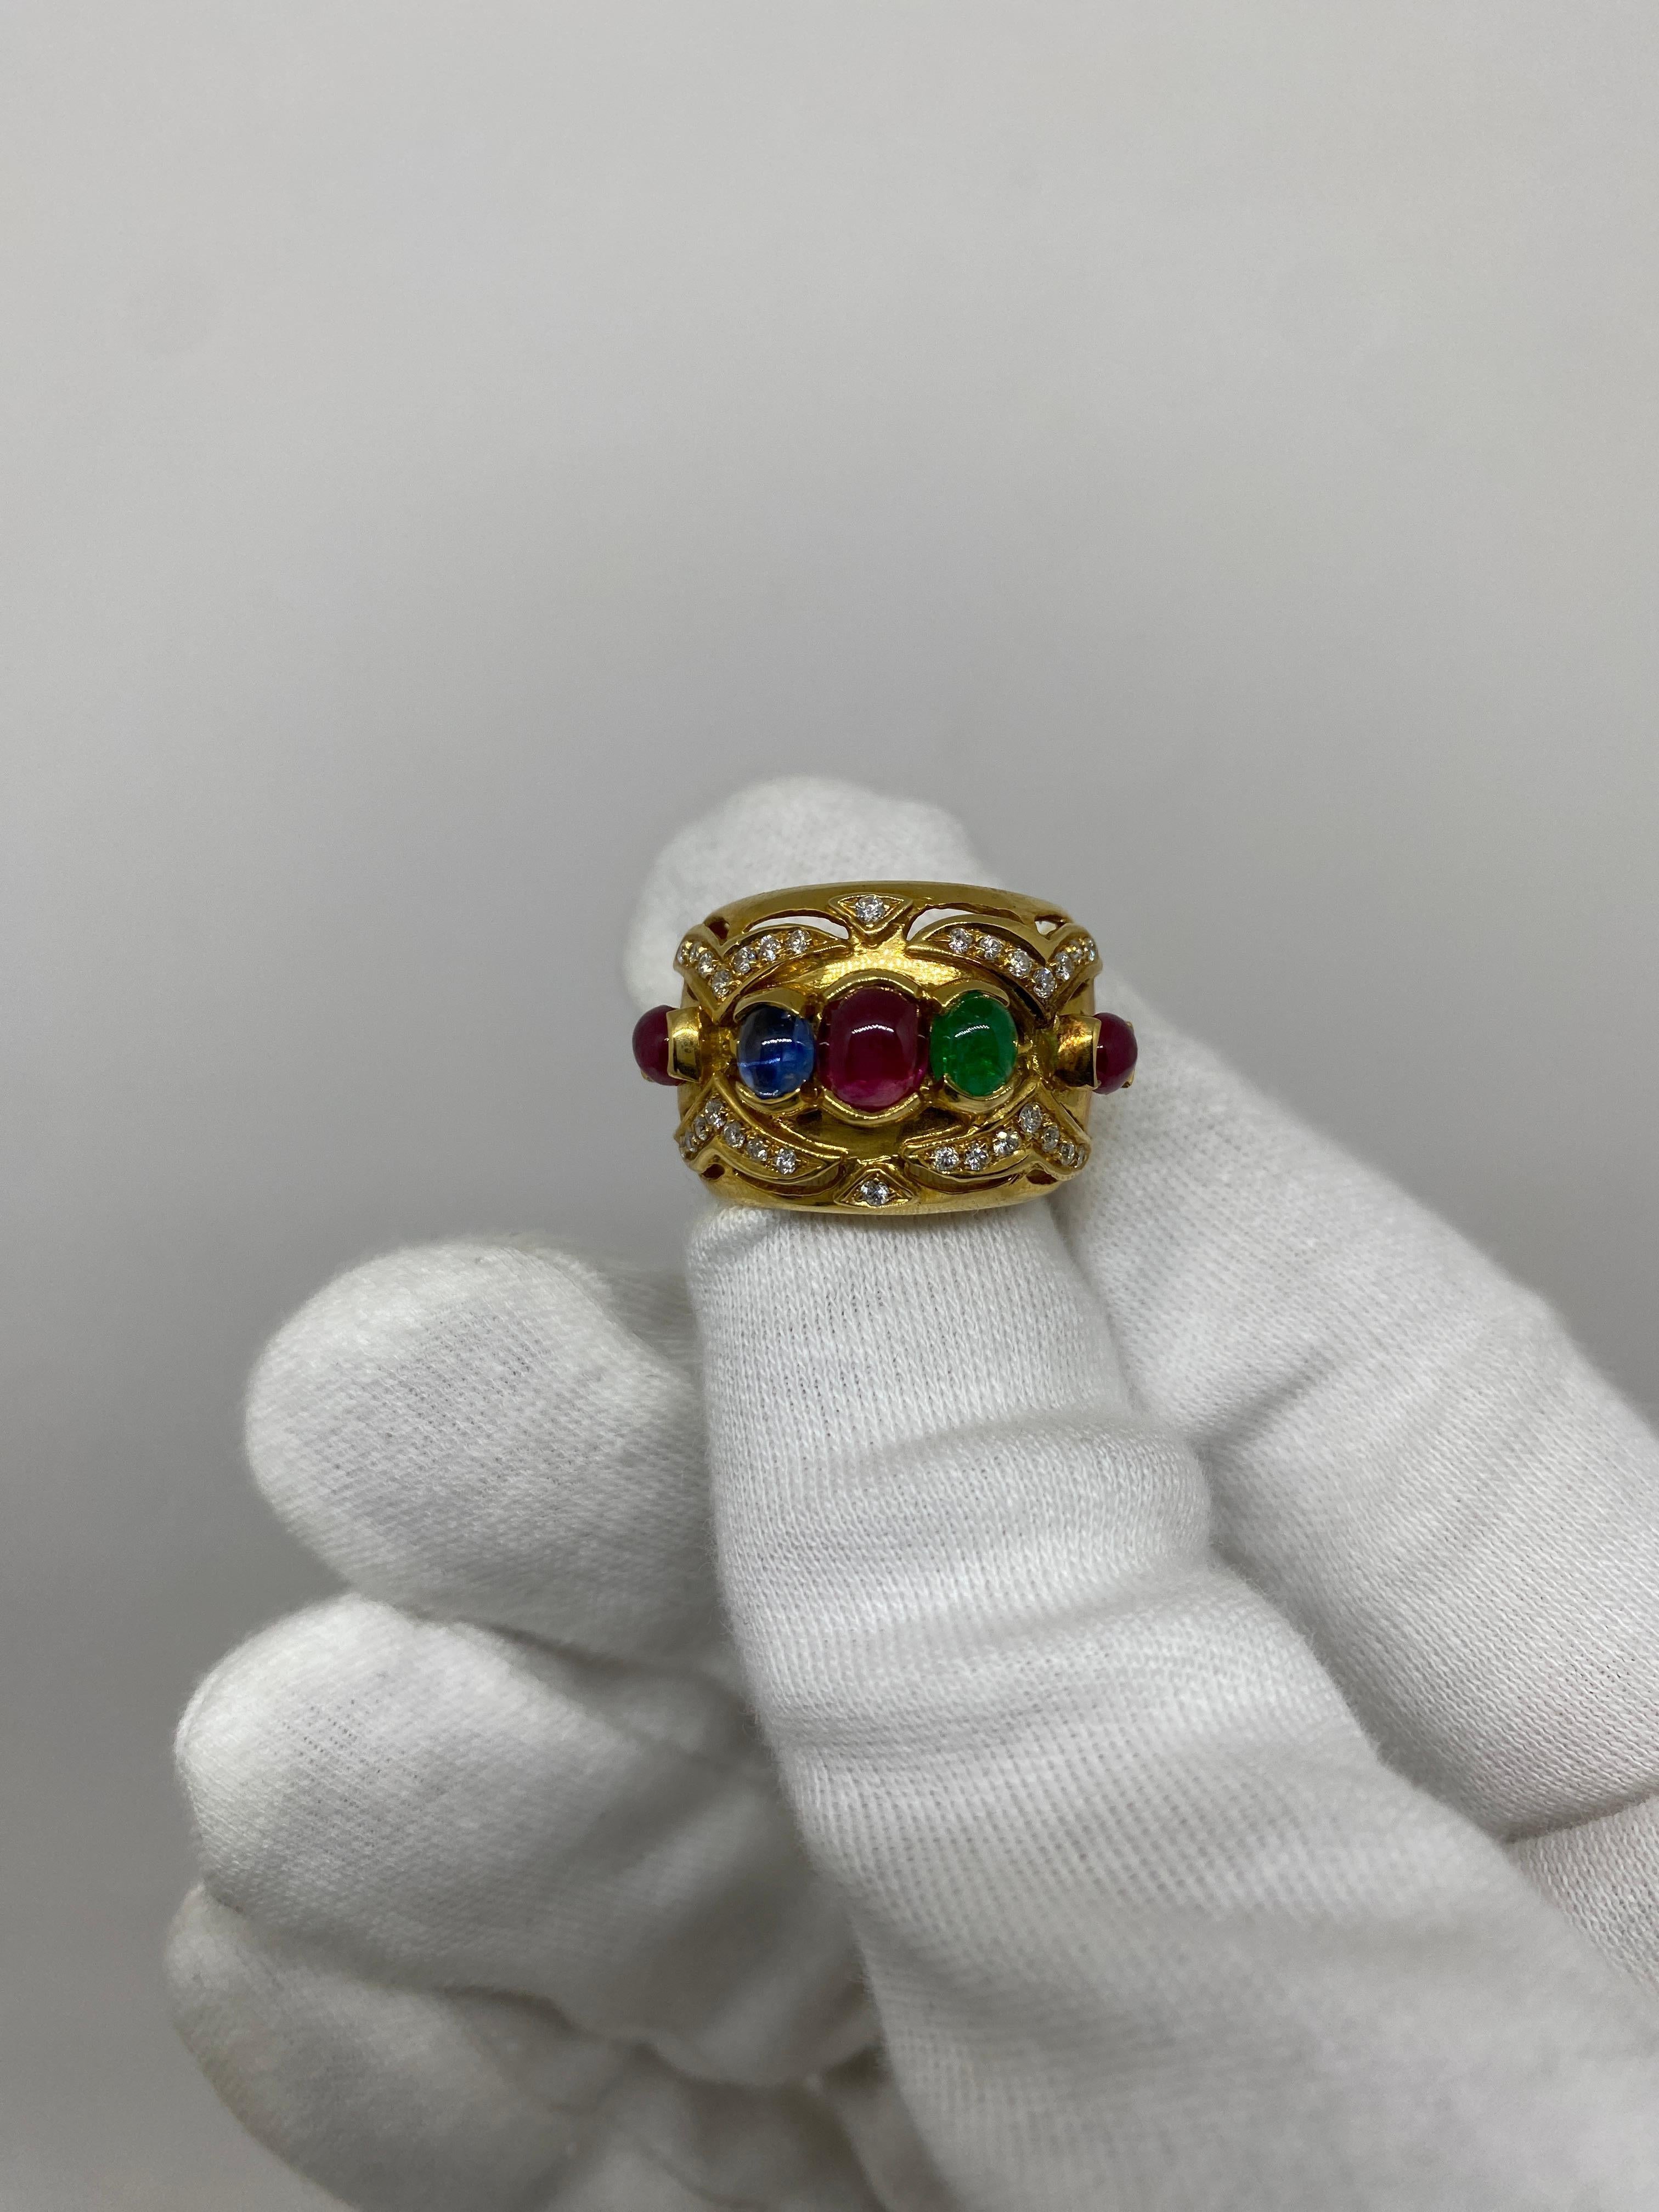 Band ring made of 18kt yellow gold with natural cabochon-cut sapphire and emerald rubies and natural white brilliant-cut diamonds

Welcome to our jewelry collection, where every piece tells a story of timeless elegance and unparalleled